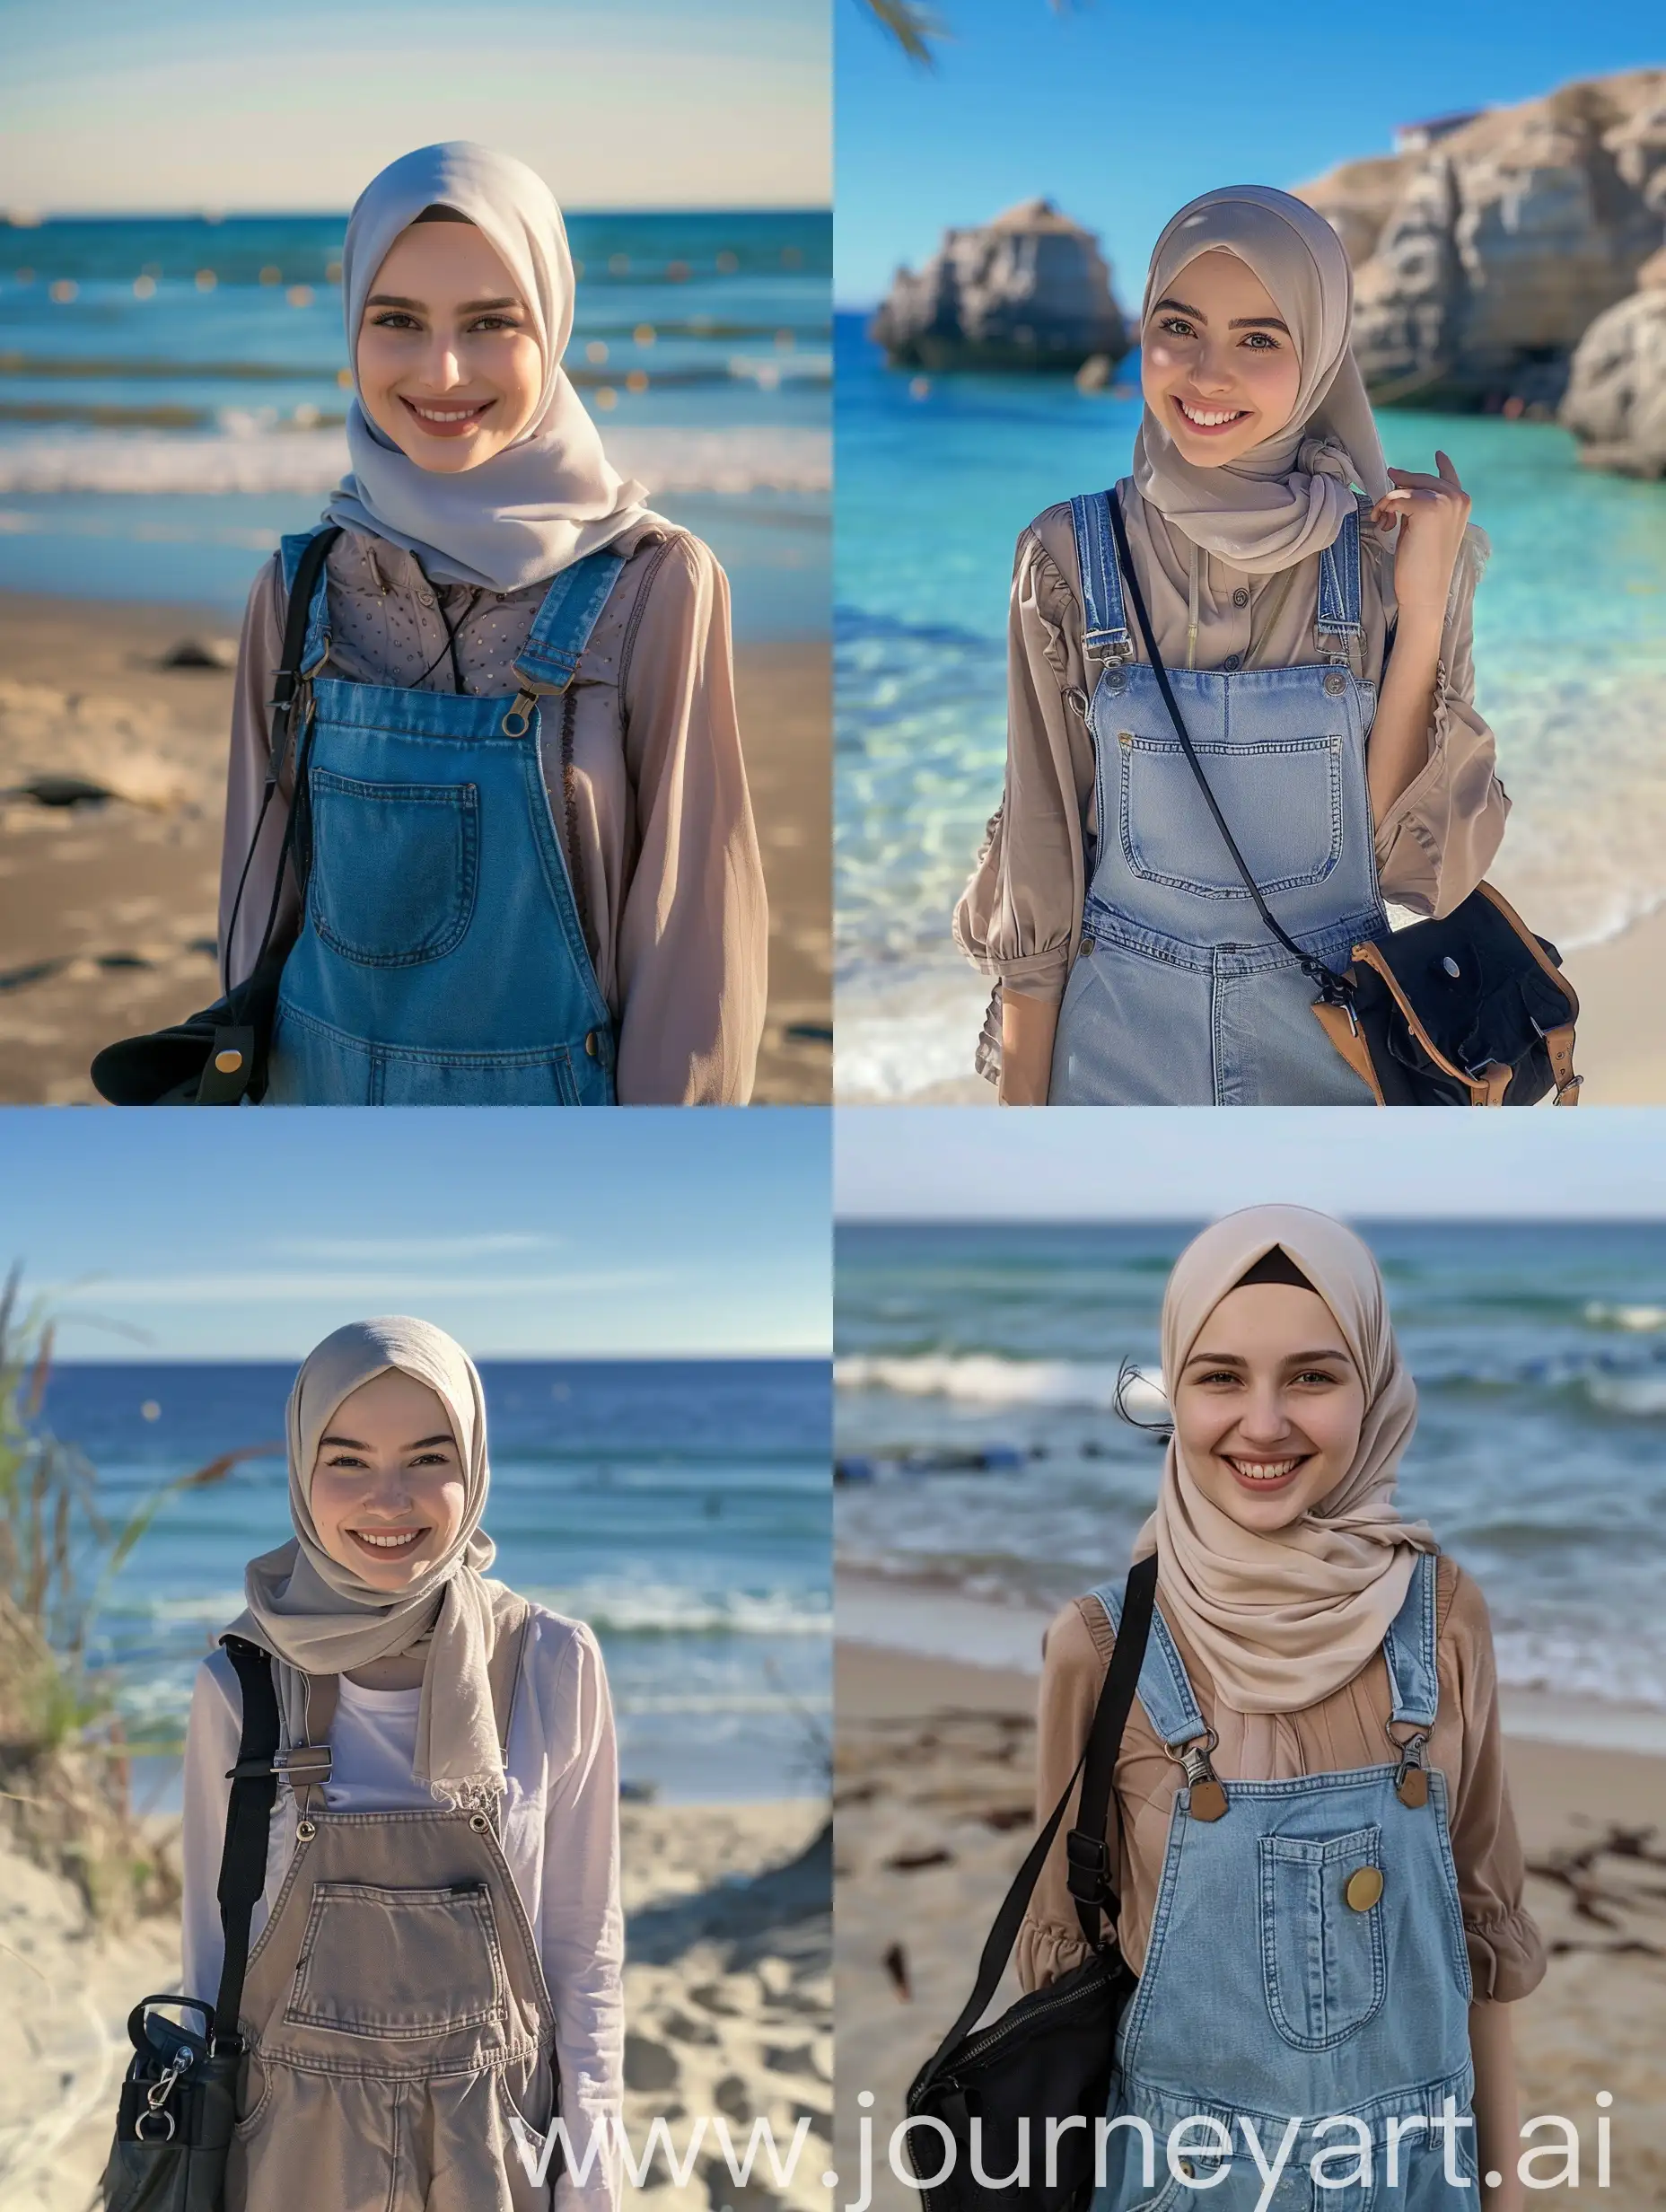 Smiling-Russian-Hijab-Woman-in-Overalls-on-Beach-with-Black-Bag